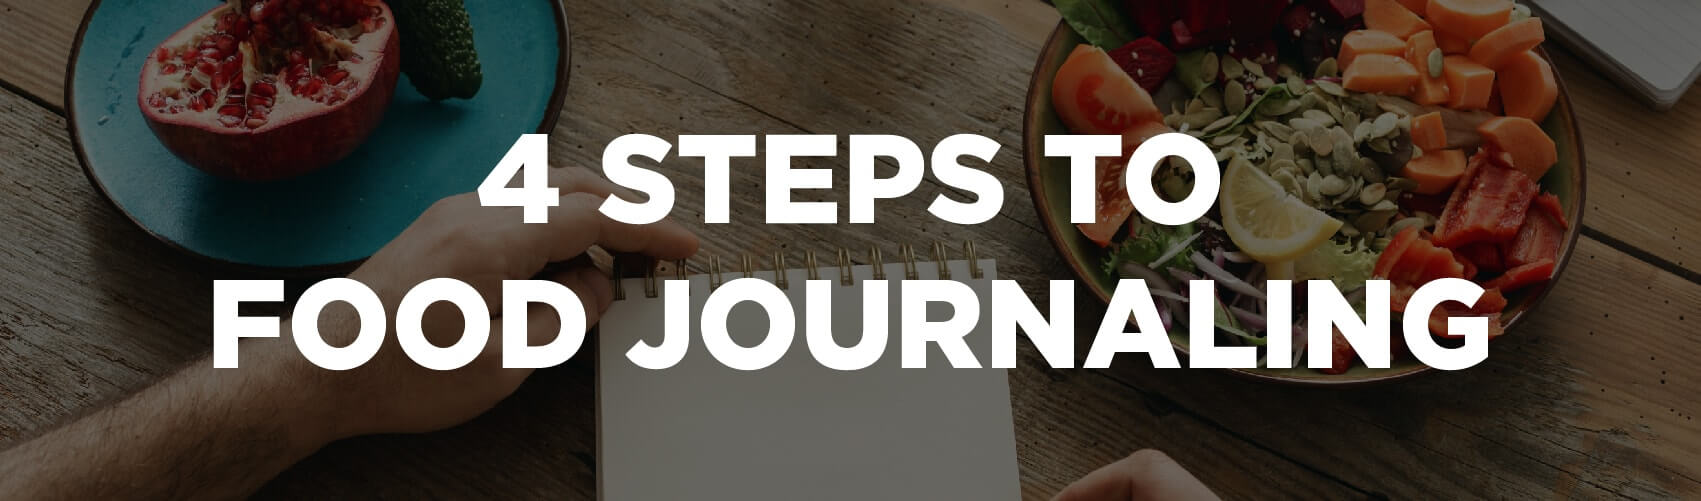 4 Steps To Food Journaling